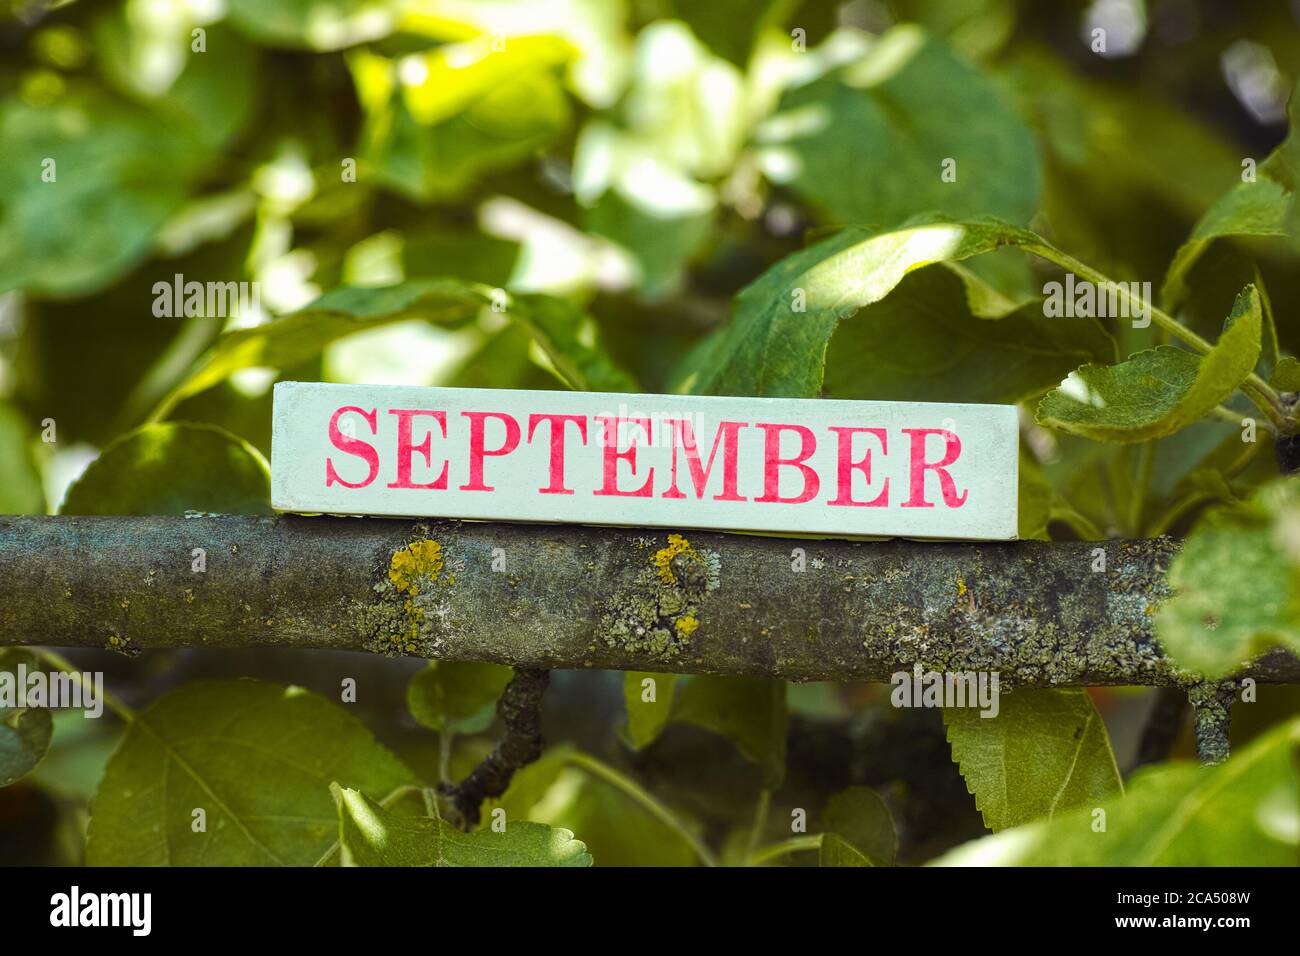 The month September printed on a wooden block lying on a tree branch. Close up. Stock Photo